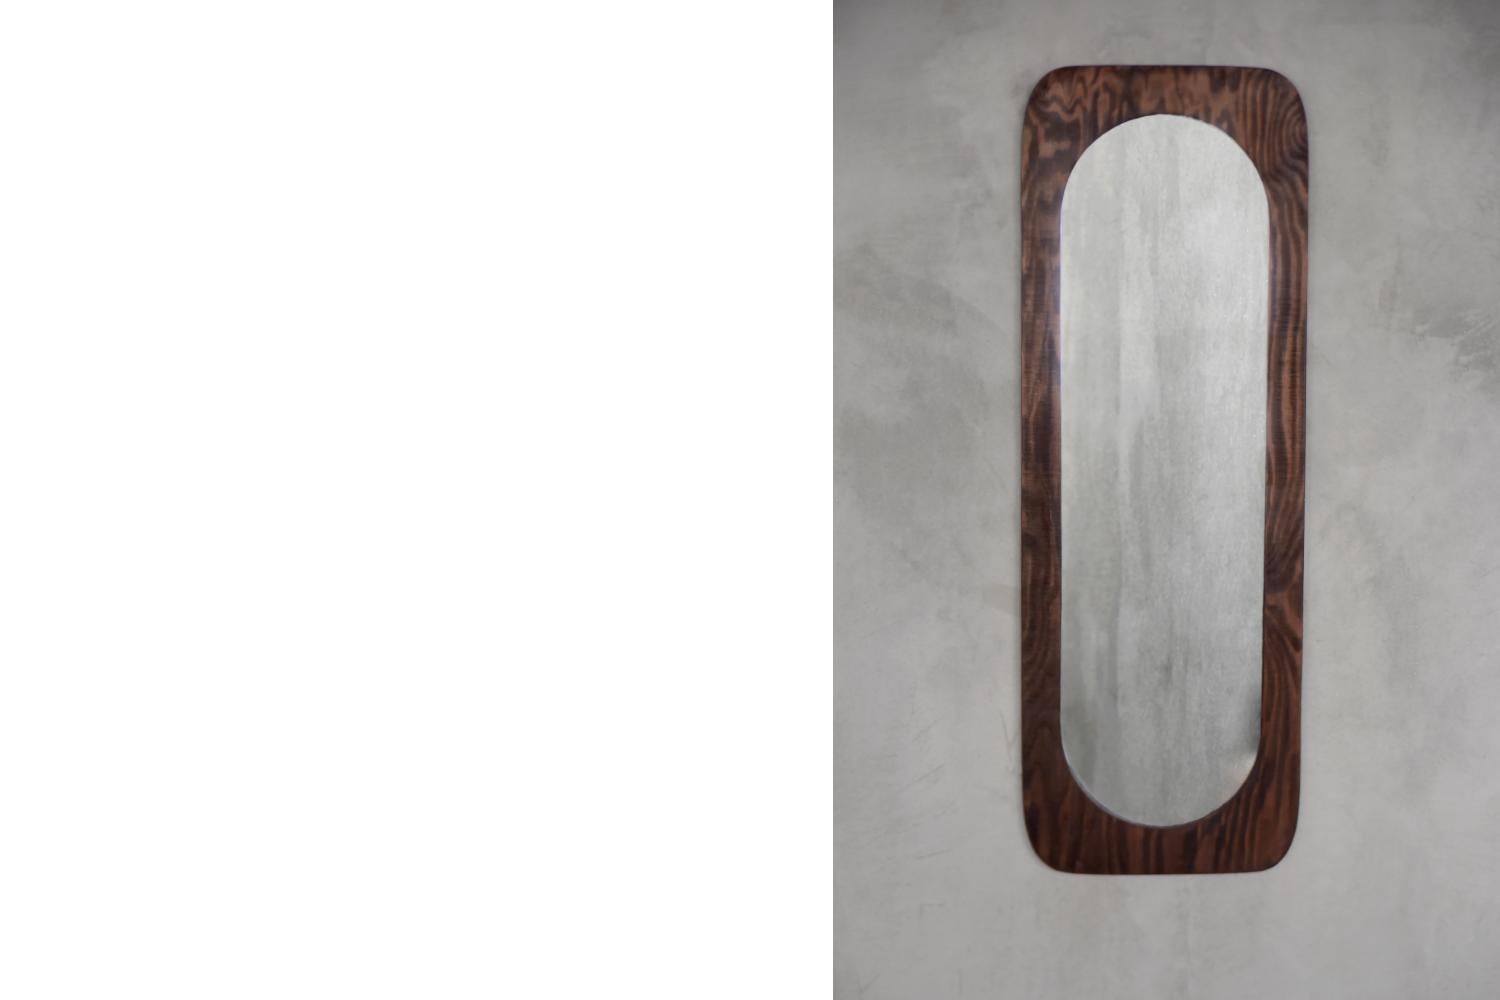 This tall wall mirror was made in Denmark during the 1950s. The rectangular mirror frame with flowing edges is made of solid wood in a dark shade of brown and tapers downwards. The slender form of the mirror makes the object light, which reflects